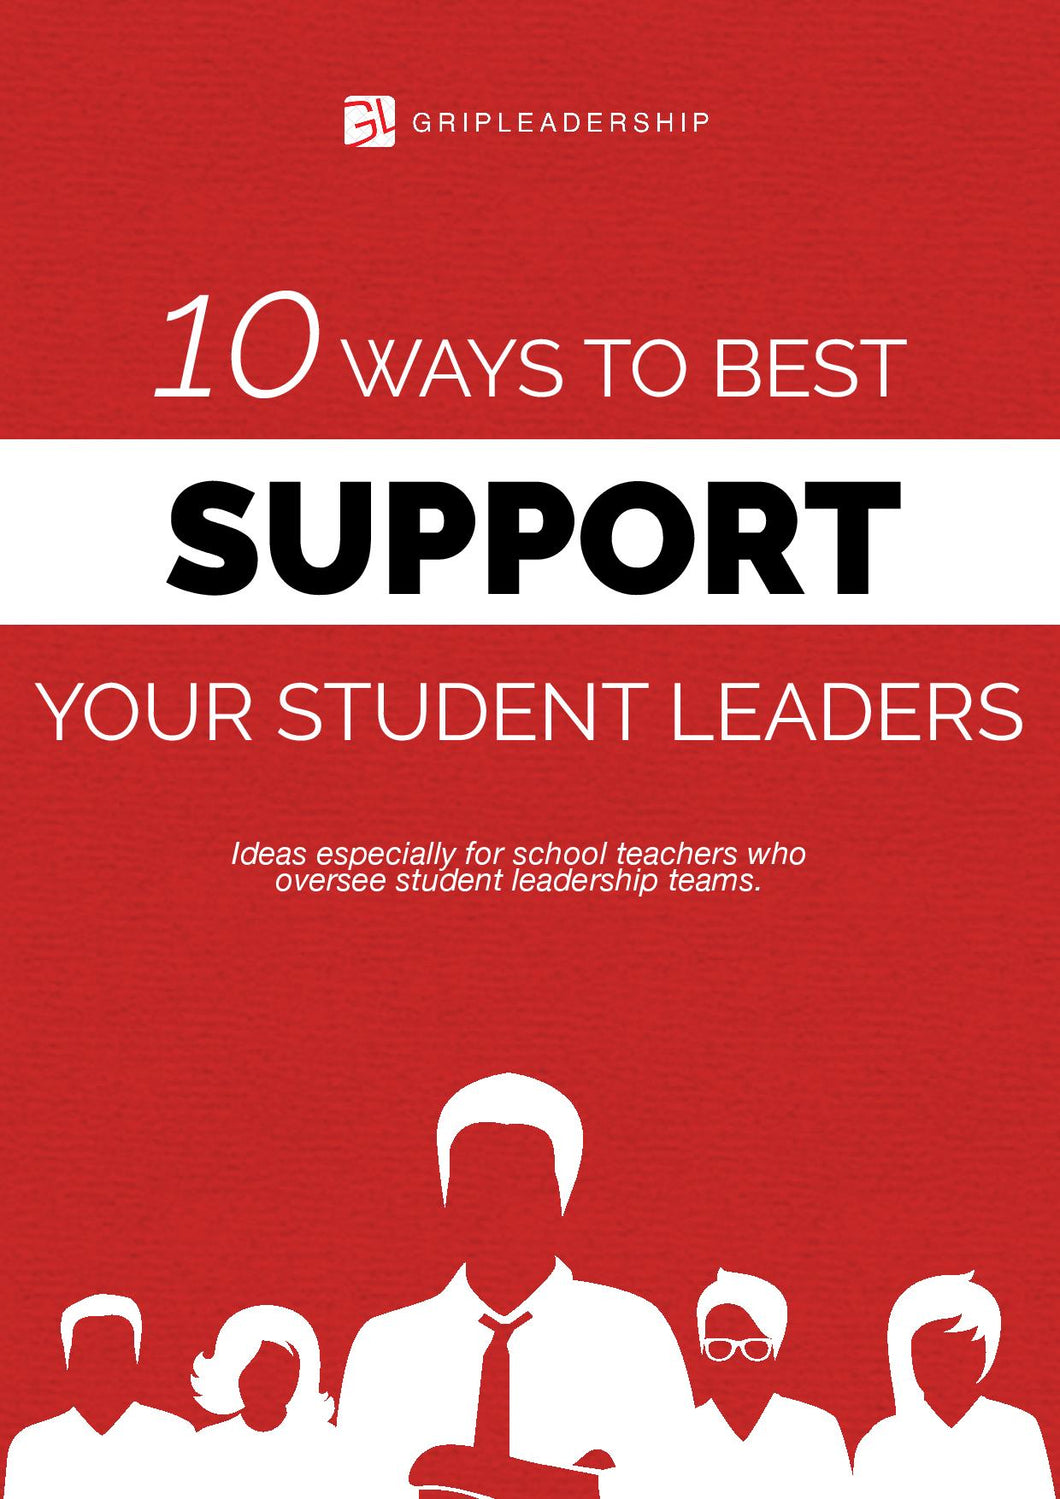 10 Ways to Best Support Your Student Leaders